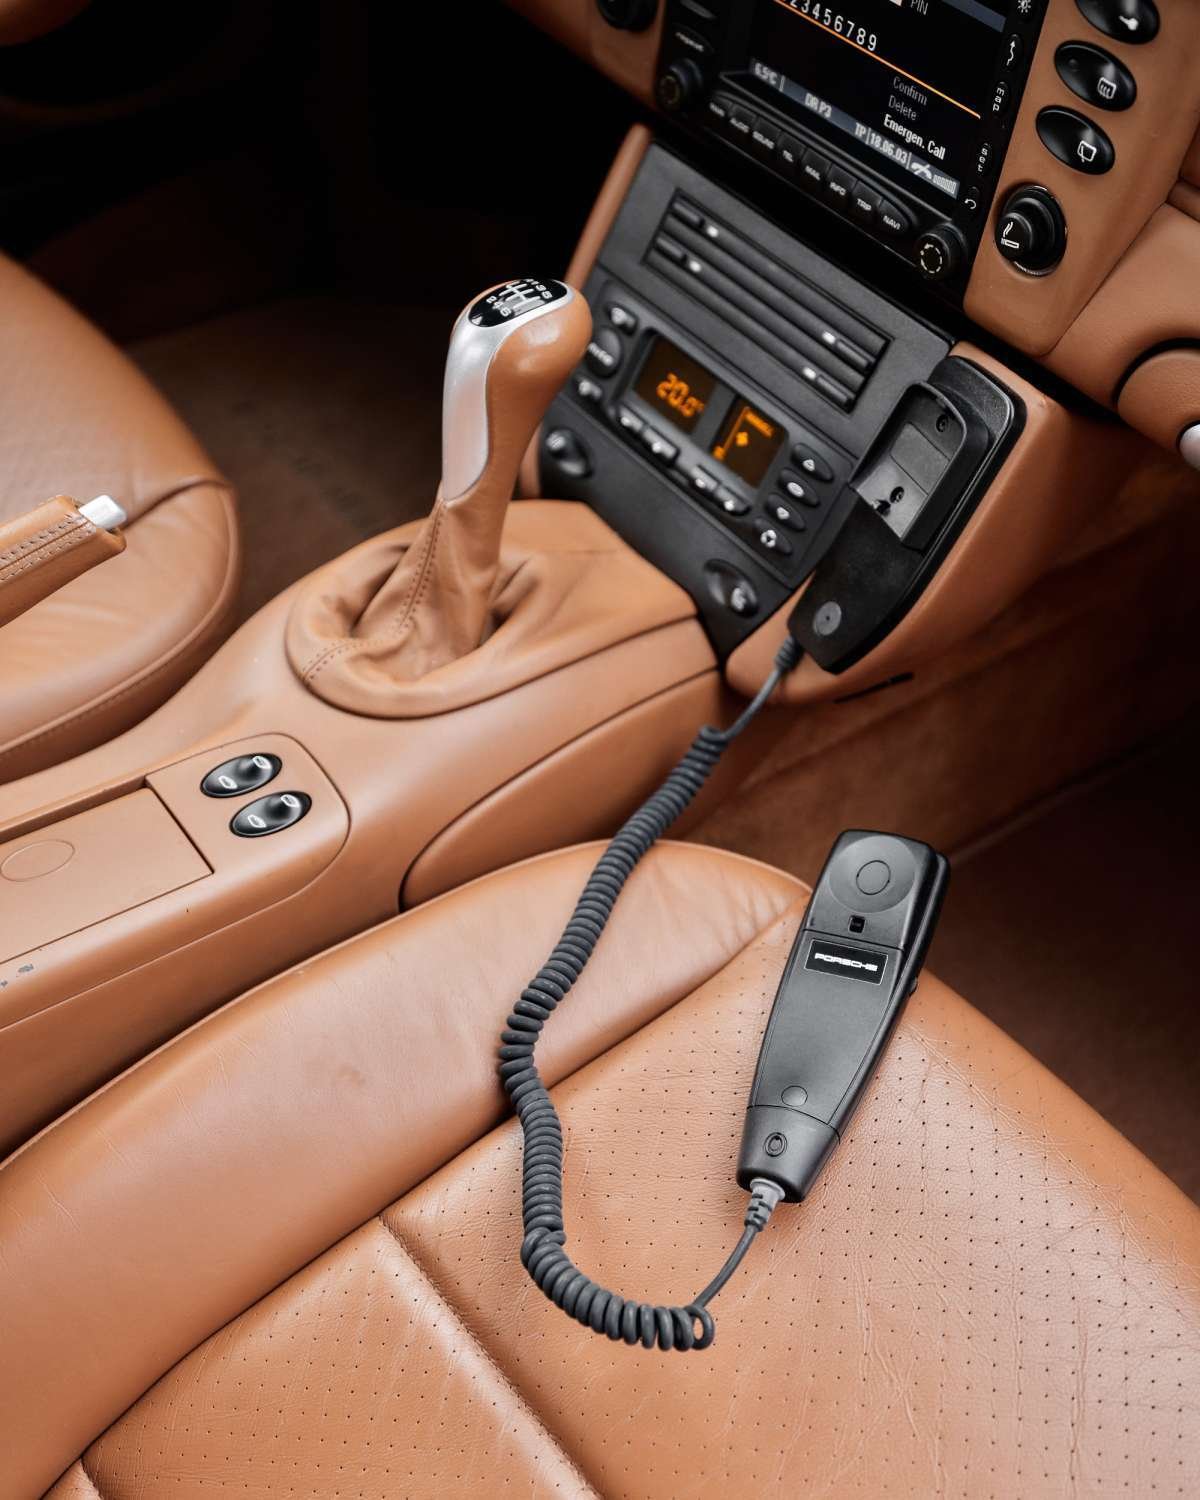 Porsche 996 Carrera 3.6/4S Buyer's Guide - PCM, phone and center console